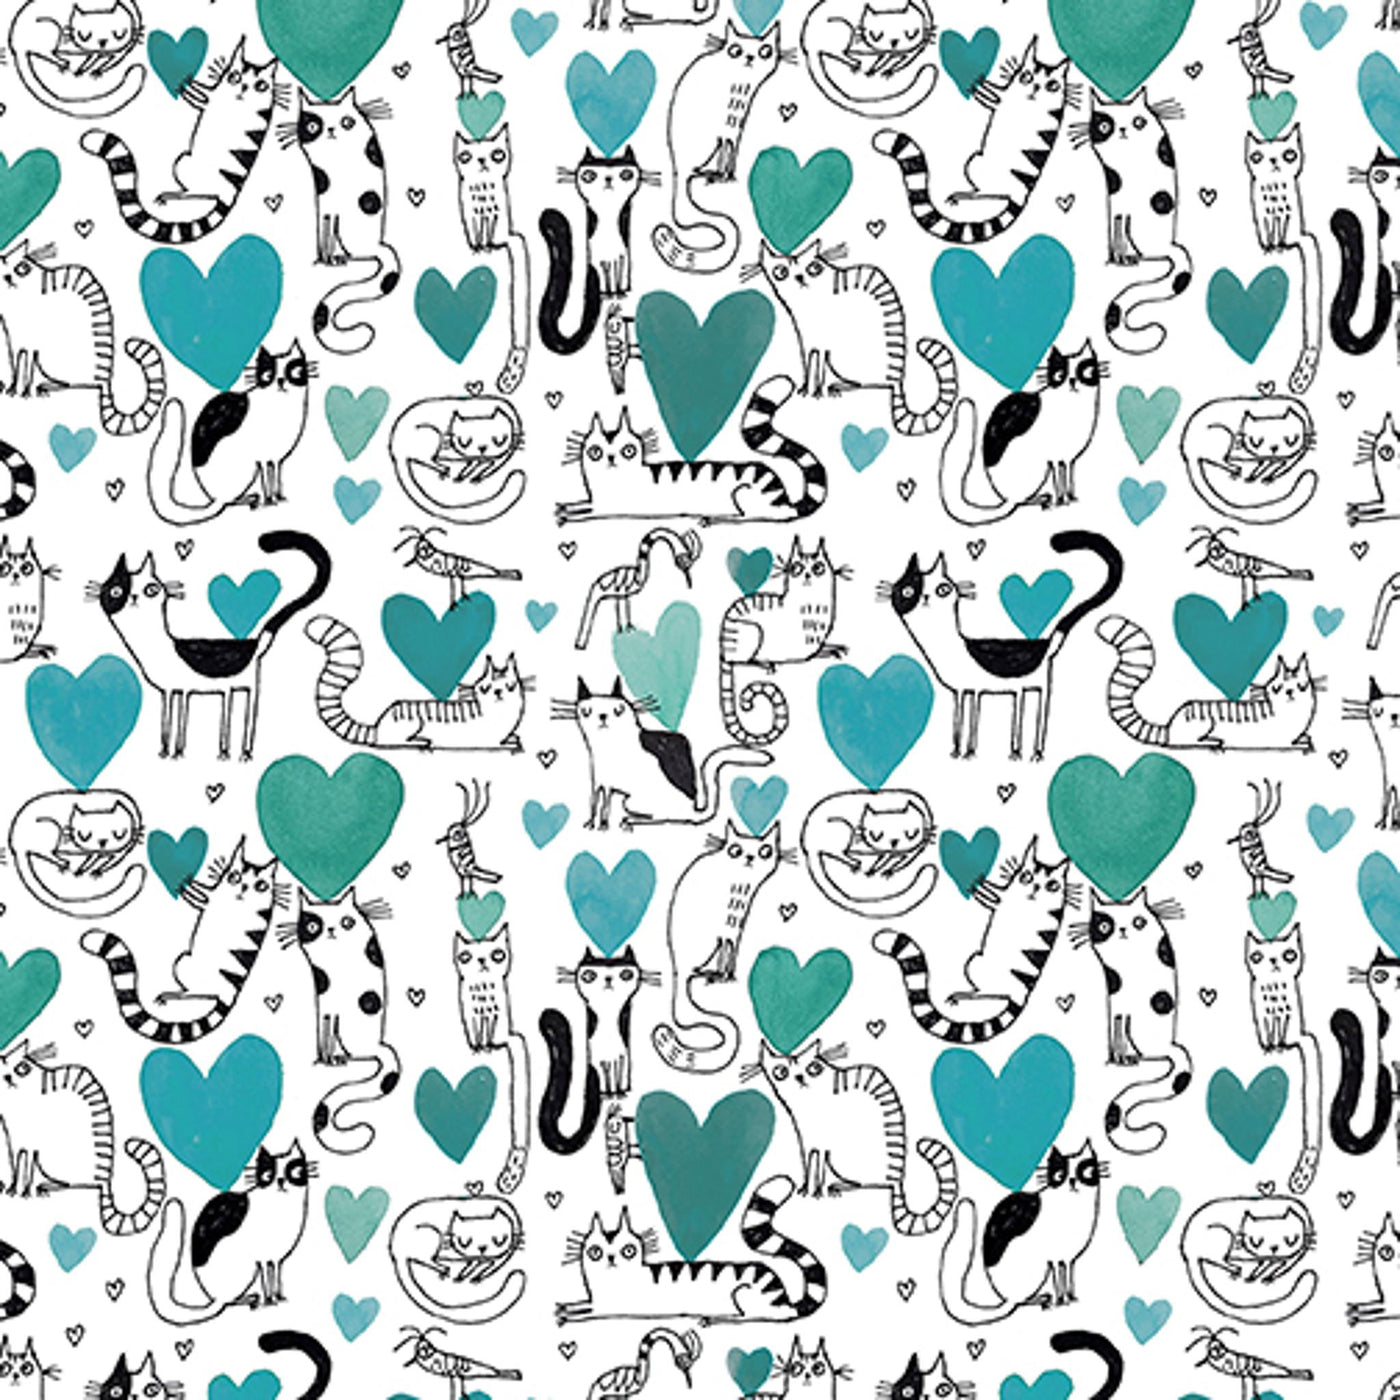 Hearts and Cats Teal 10335-80 (It's raining Cats and Dogs)